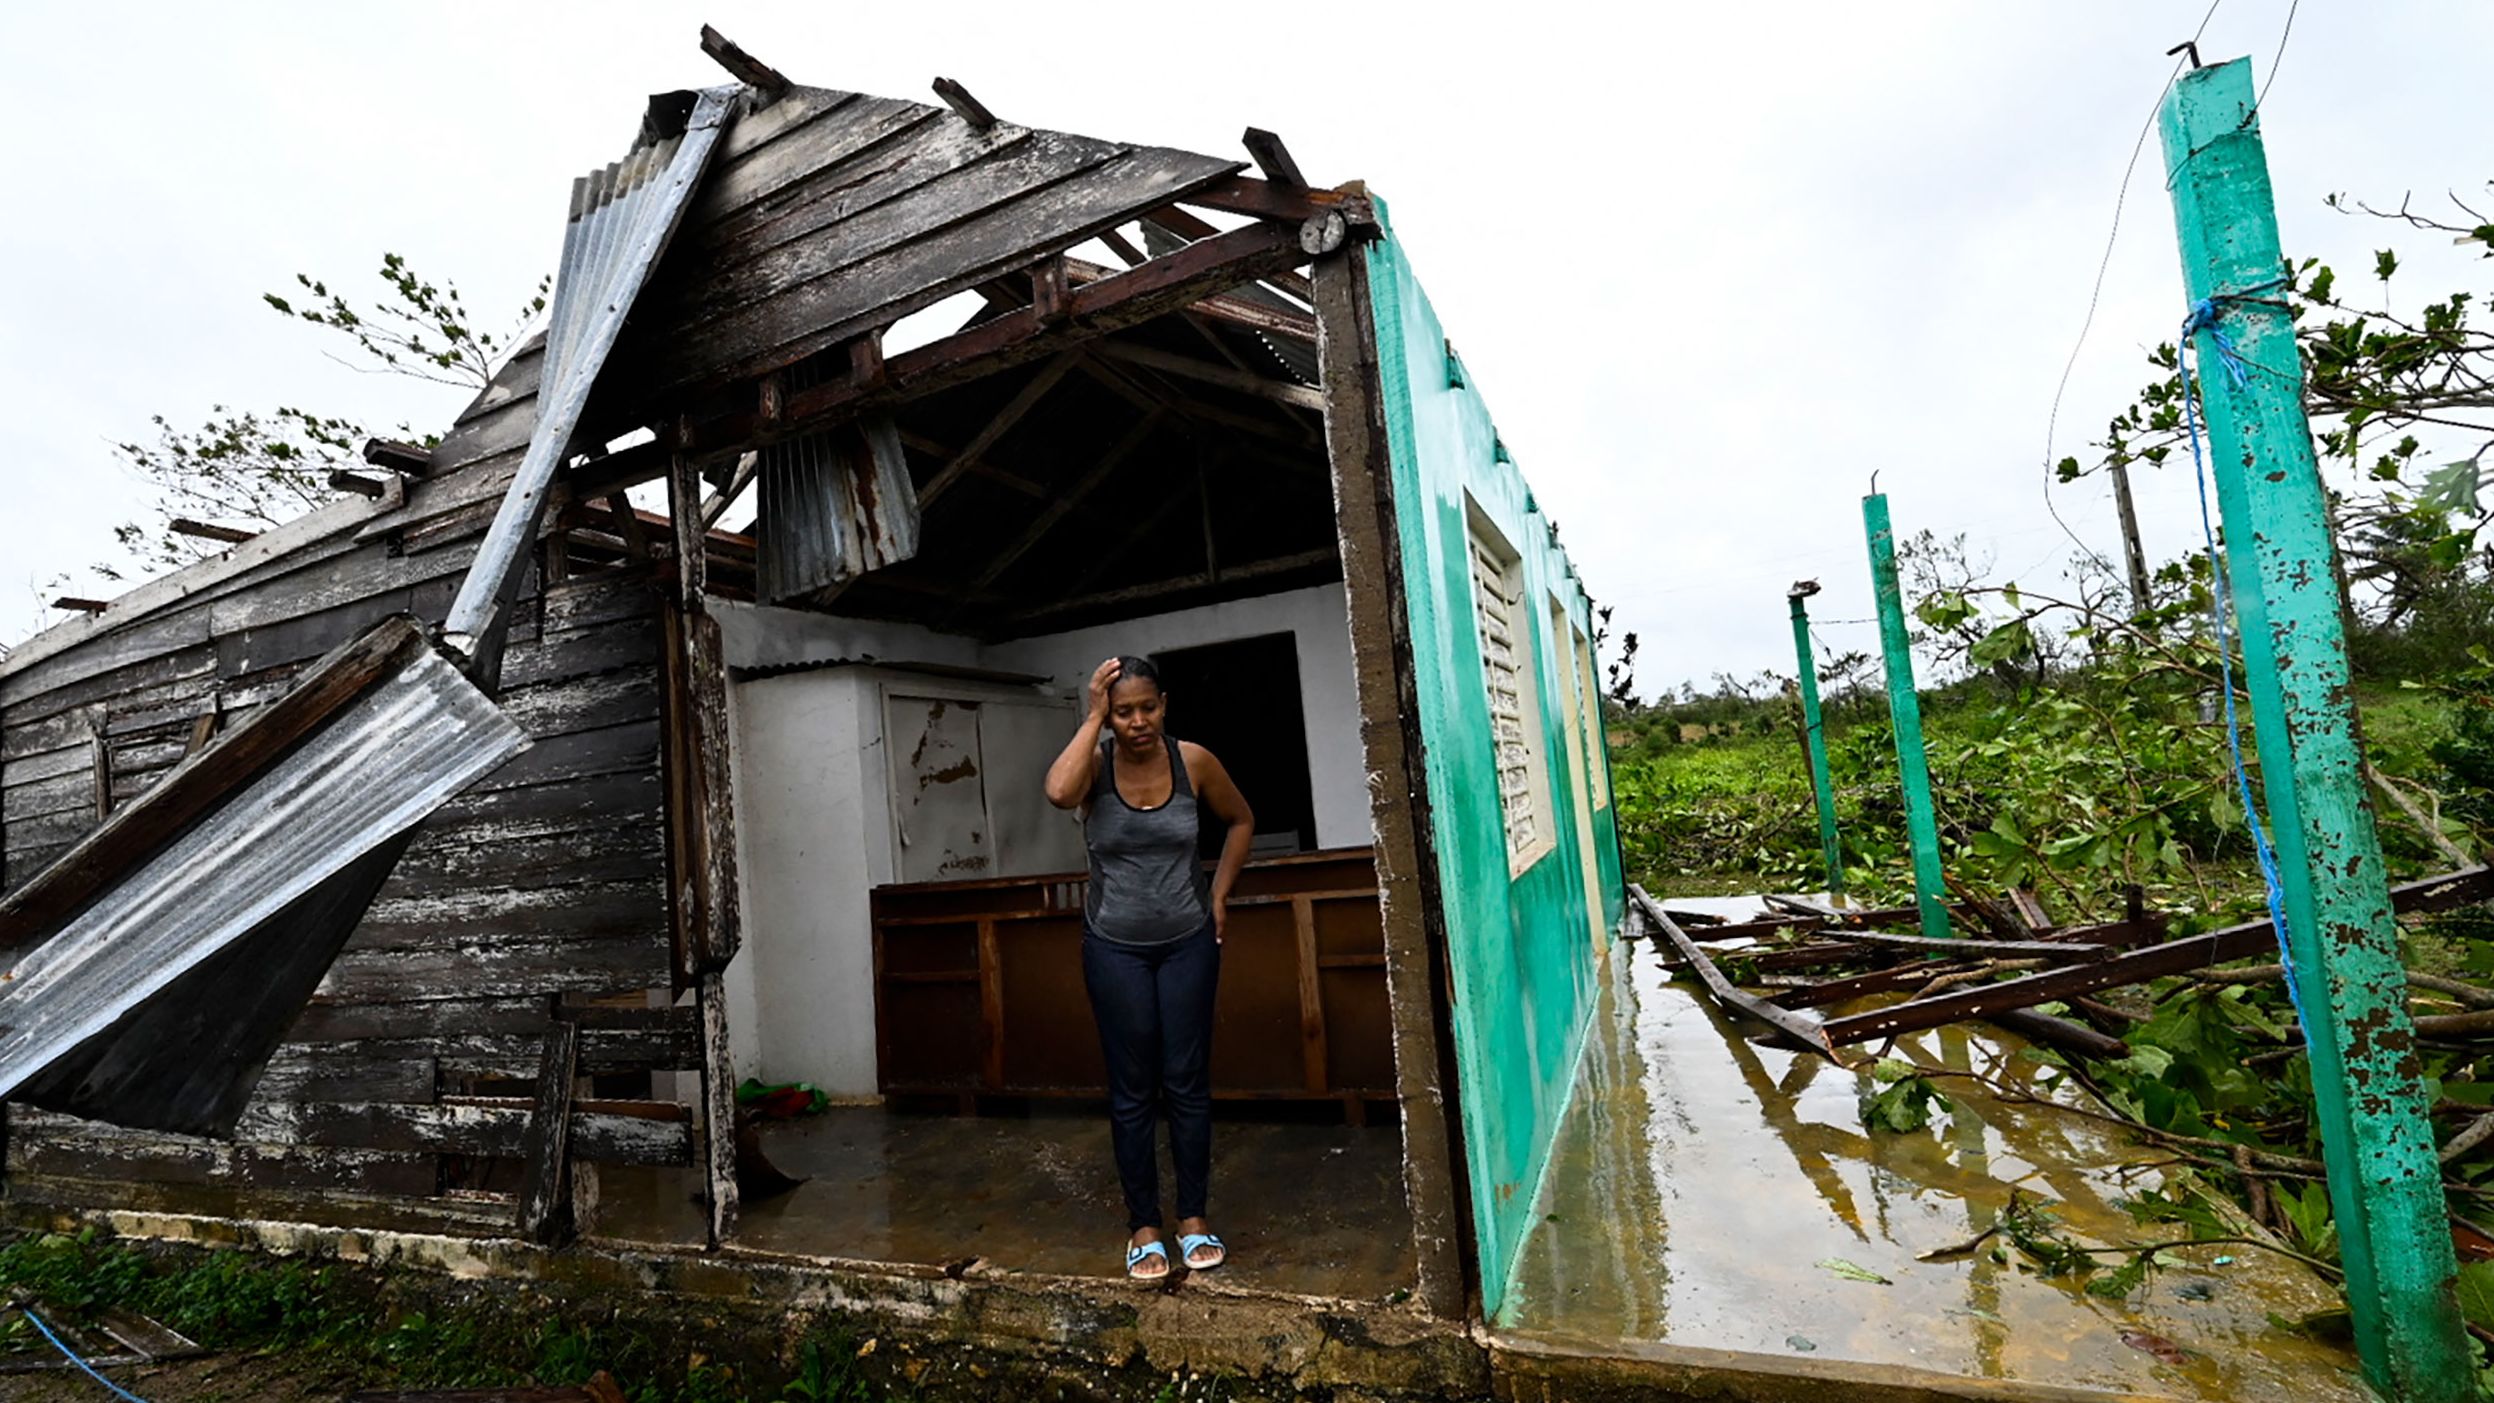 Caridad Alvarez stands in her hurricane-damaged home in San Juan y Martinez, Cuba, on Tuesday, September 27. Hurricane Ian <a href="https://www.cnn.com/2022/09/27/americas/hurricane-ian-cuba-blackout-intl-hnk/index.html" target="_blank">left the entire island without power.</a>